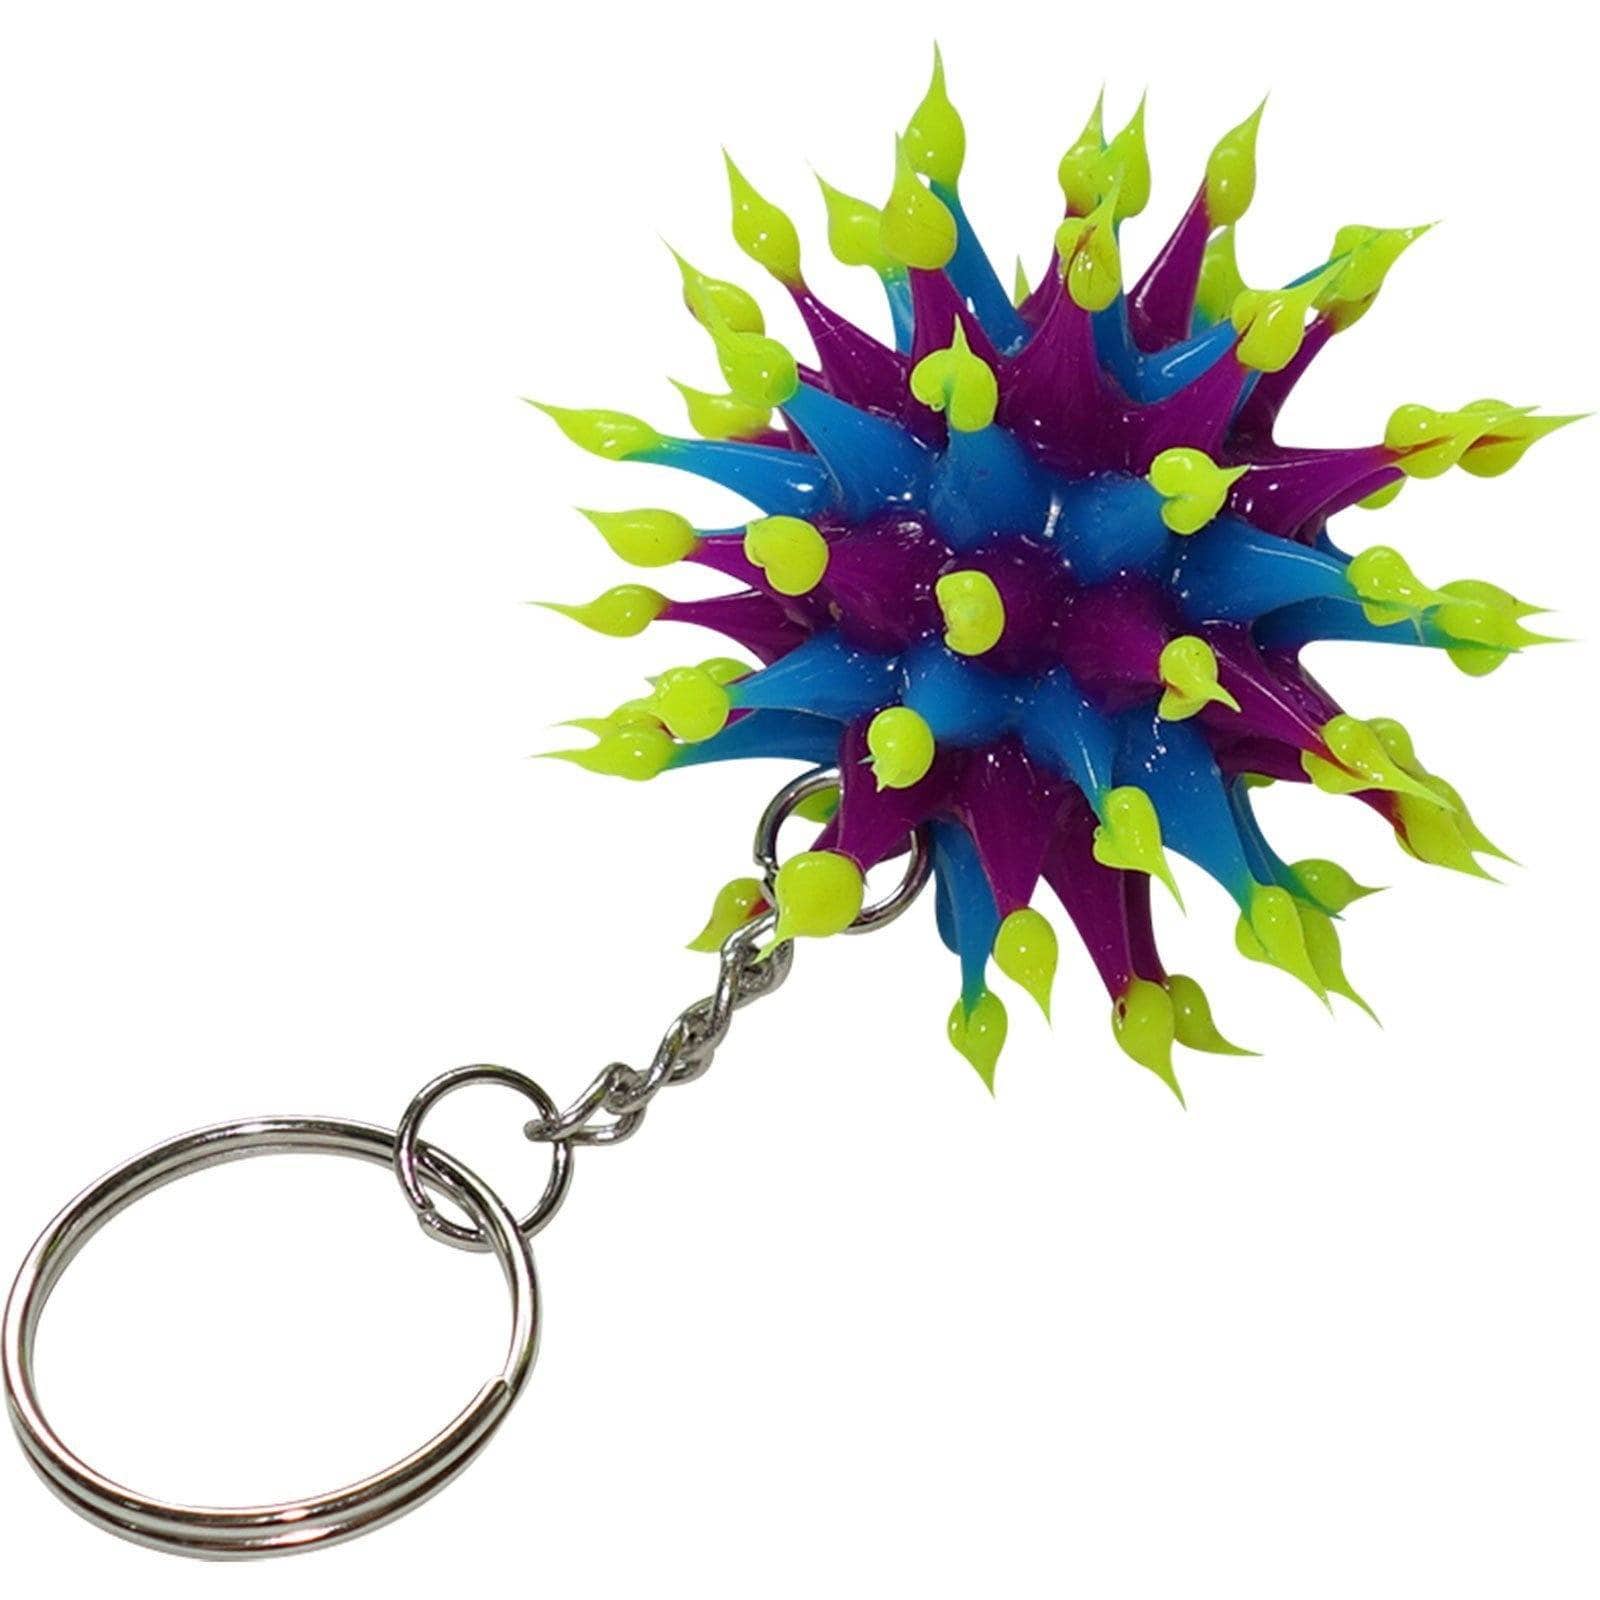 2 X Fun Bright Spiky Neon Ball Keyrings Rubber Silicone Keychains Key Chain Fobs